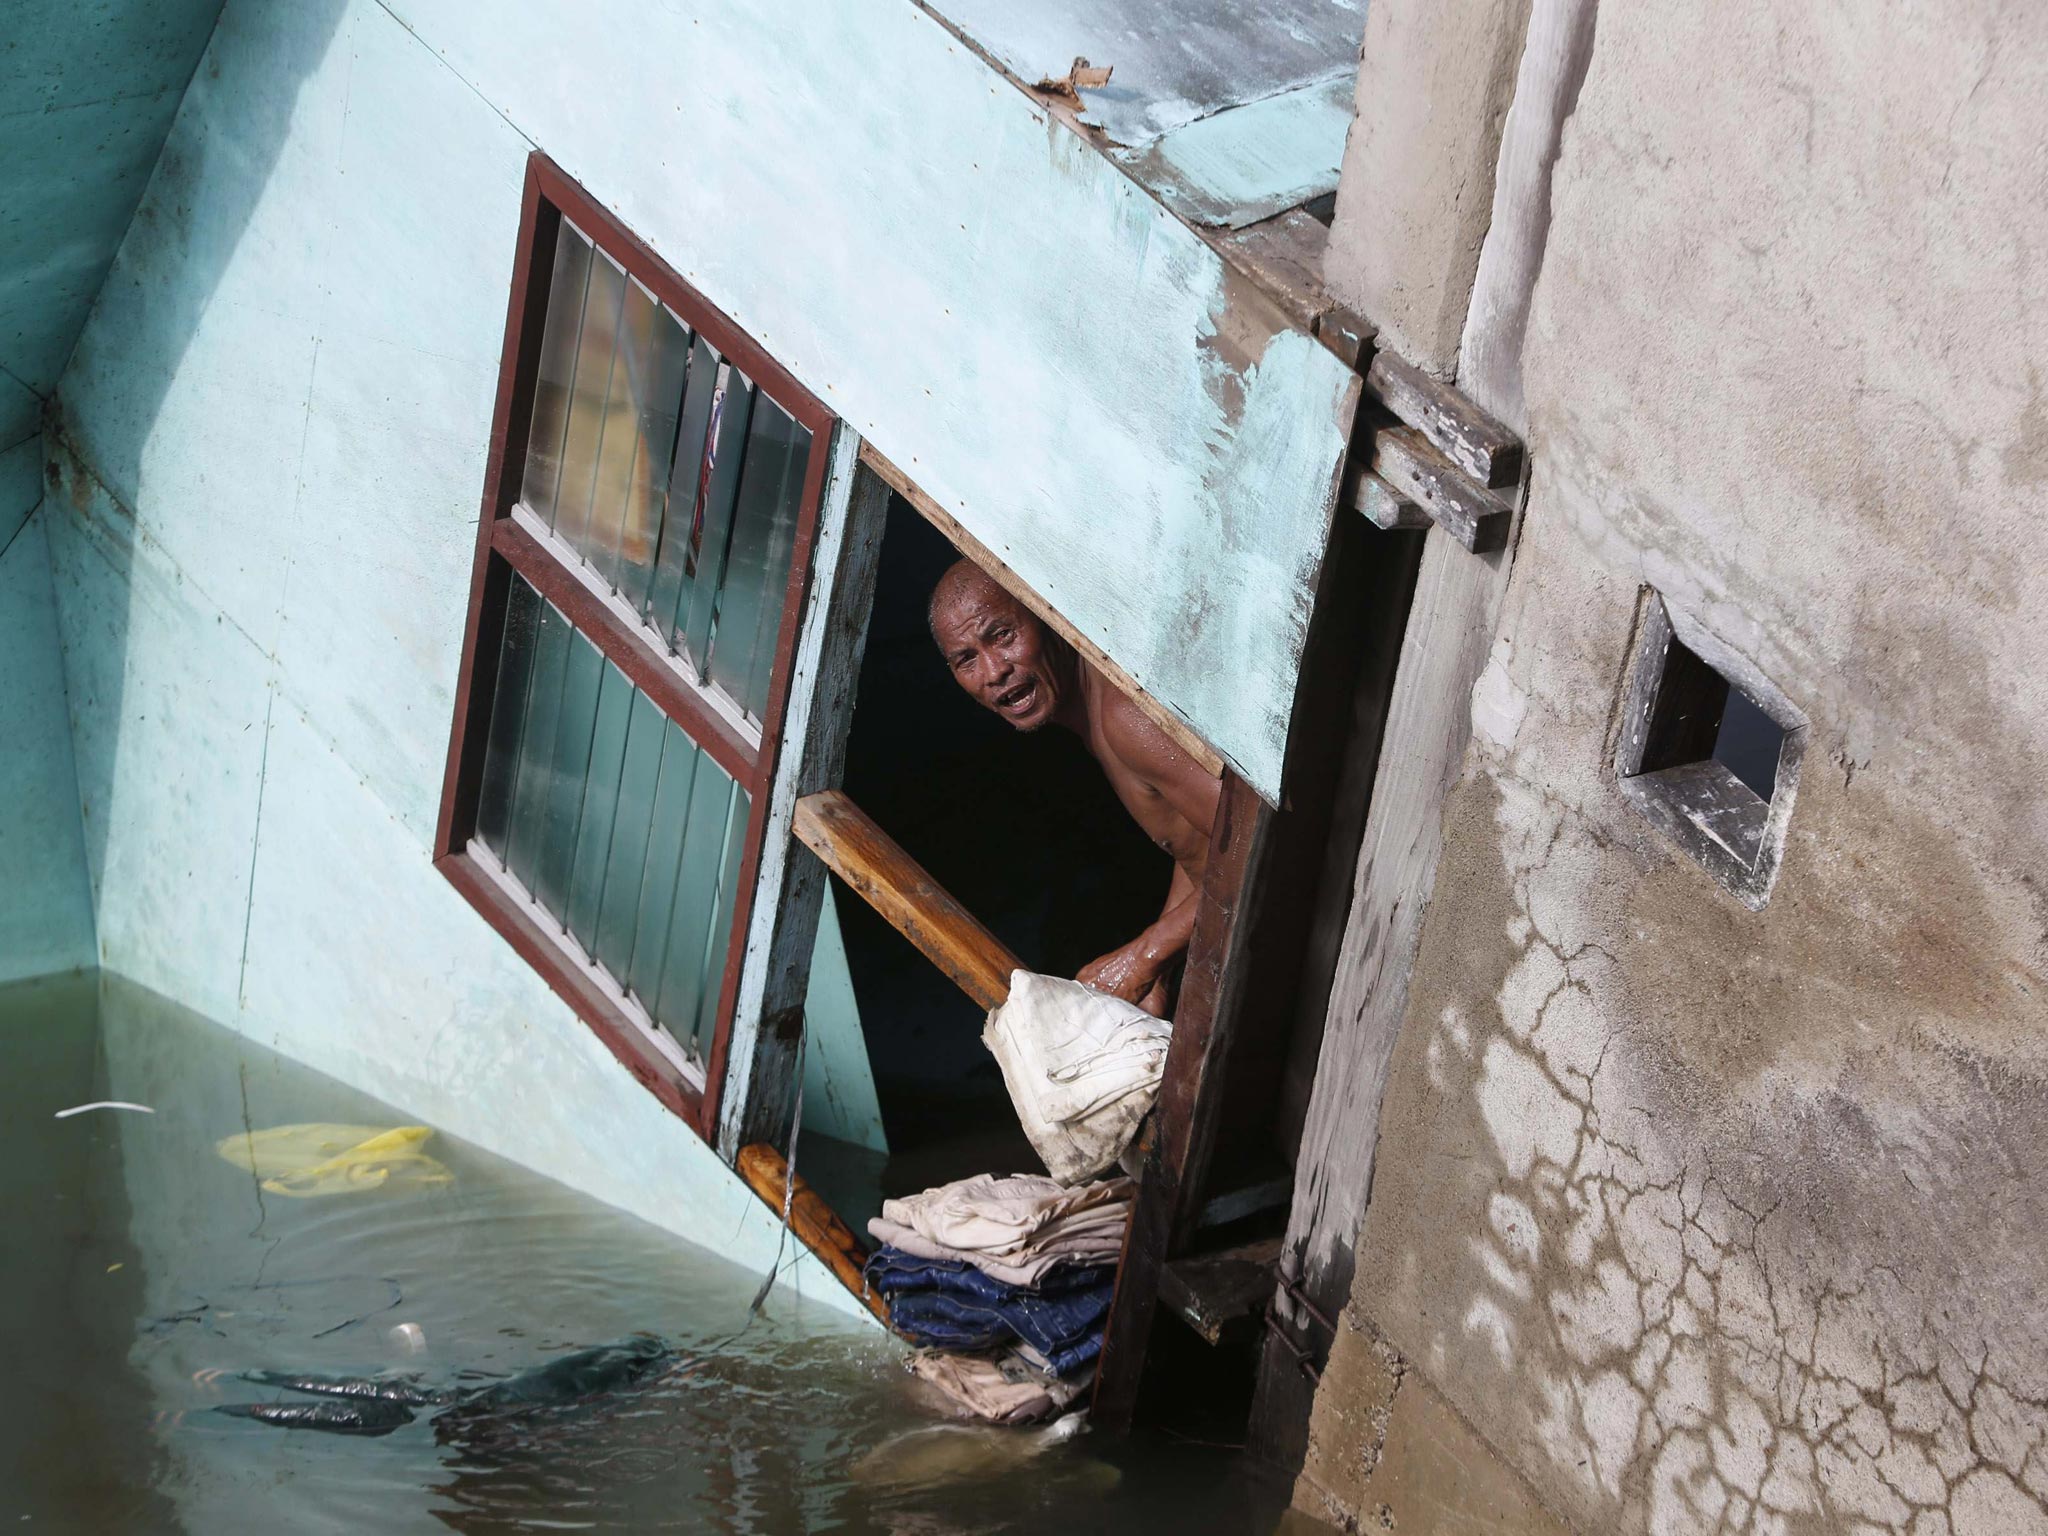 16 October 2013: A resident looks out from a window of his family's home, which fell into a river, after an earthquake in Buenavista, Bohol a day after an earthquake hit central Philippines